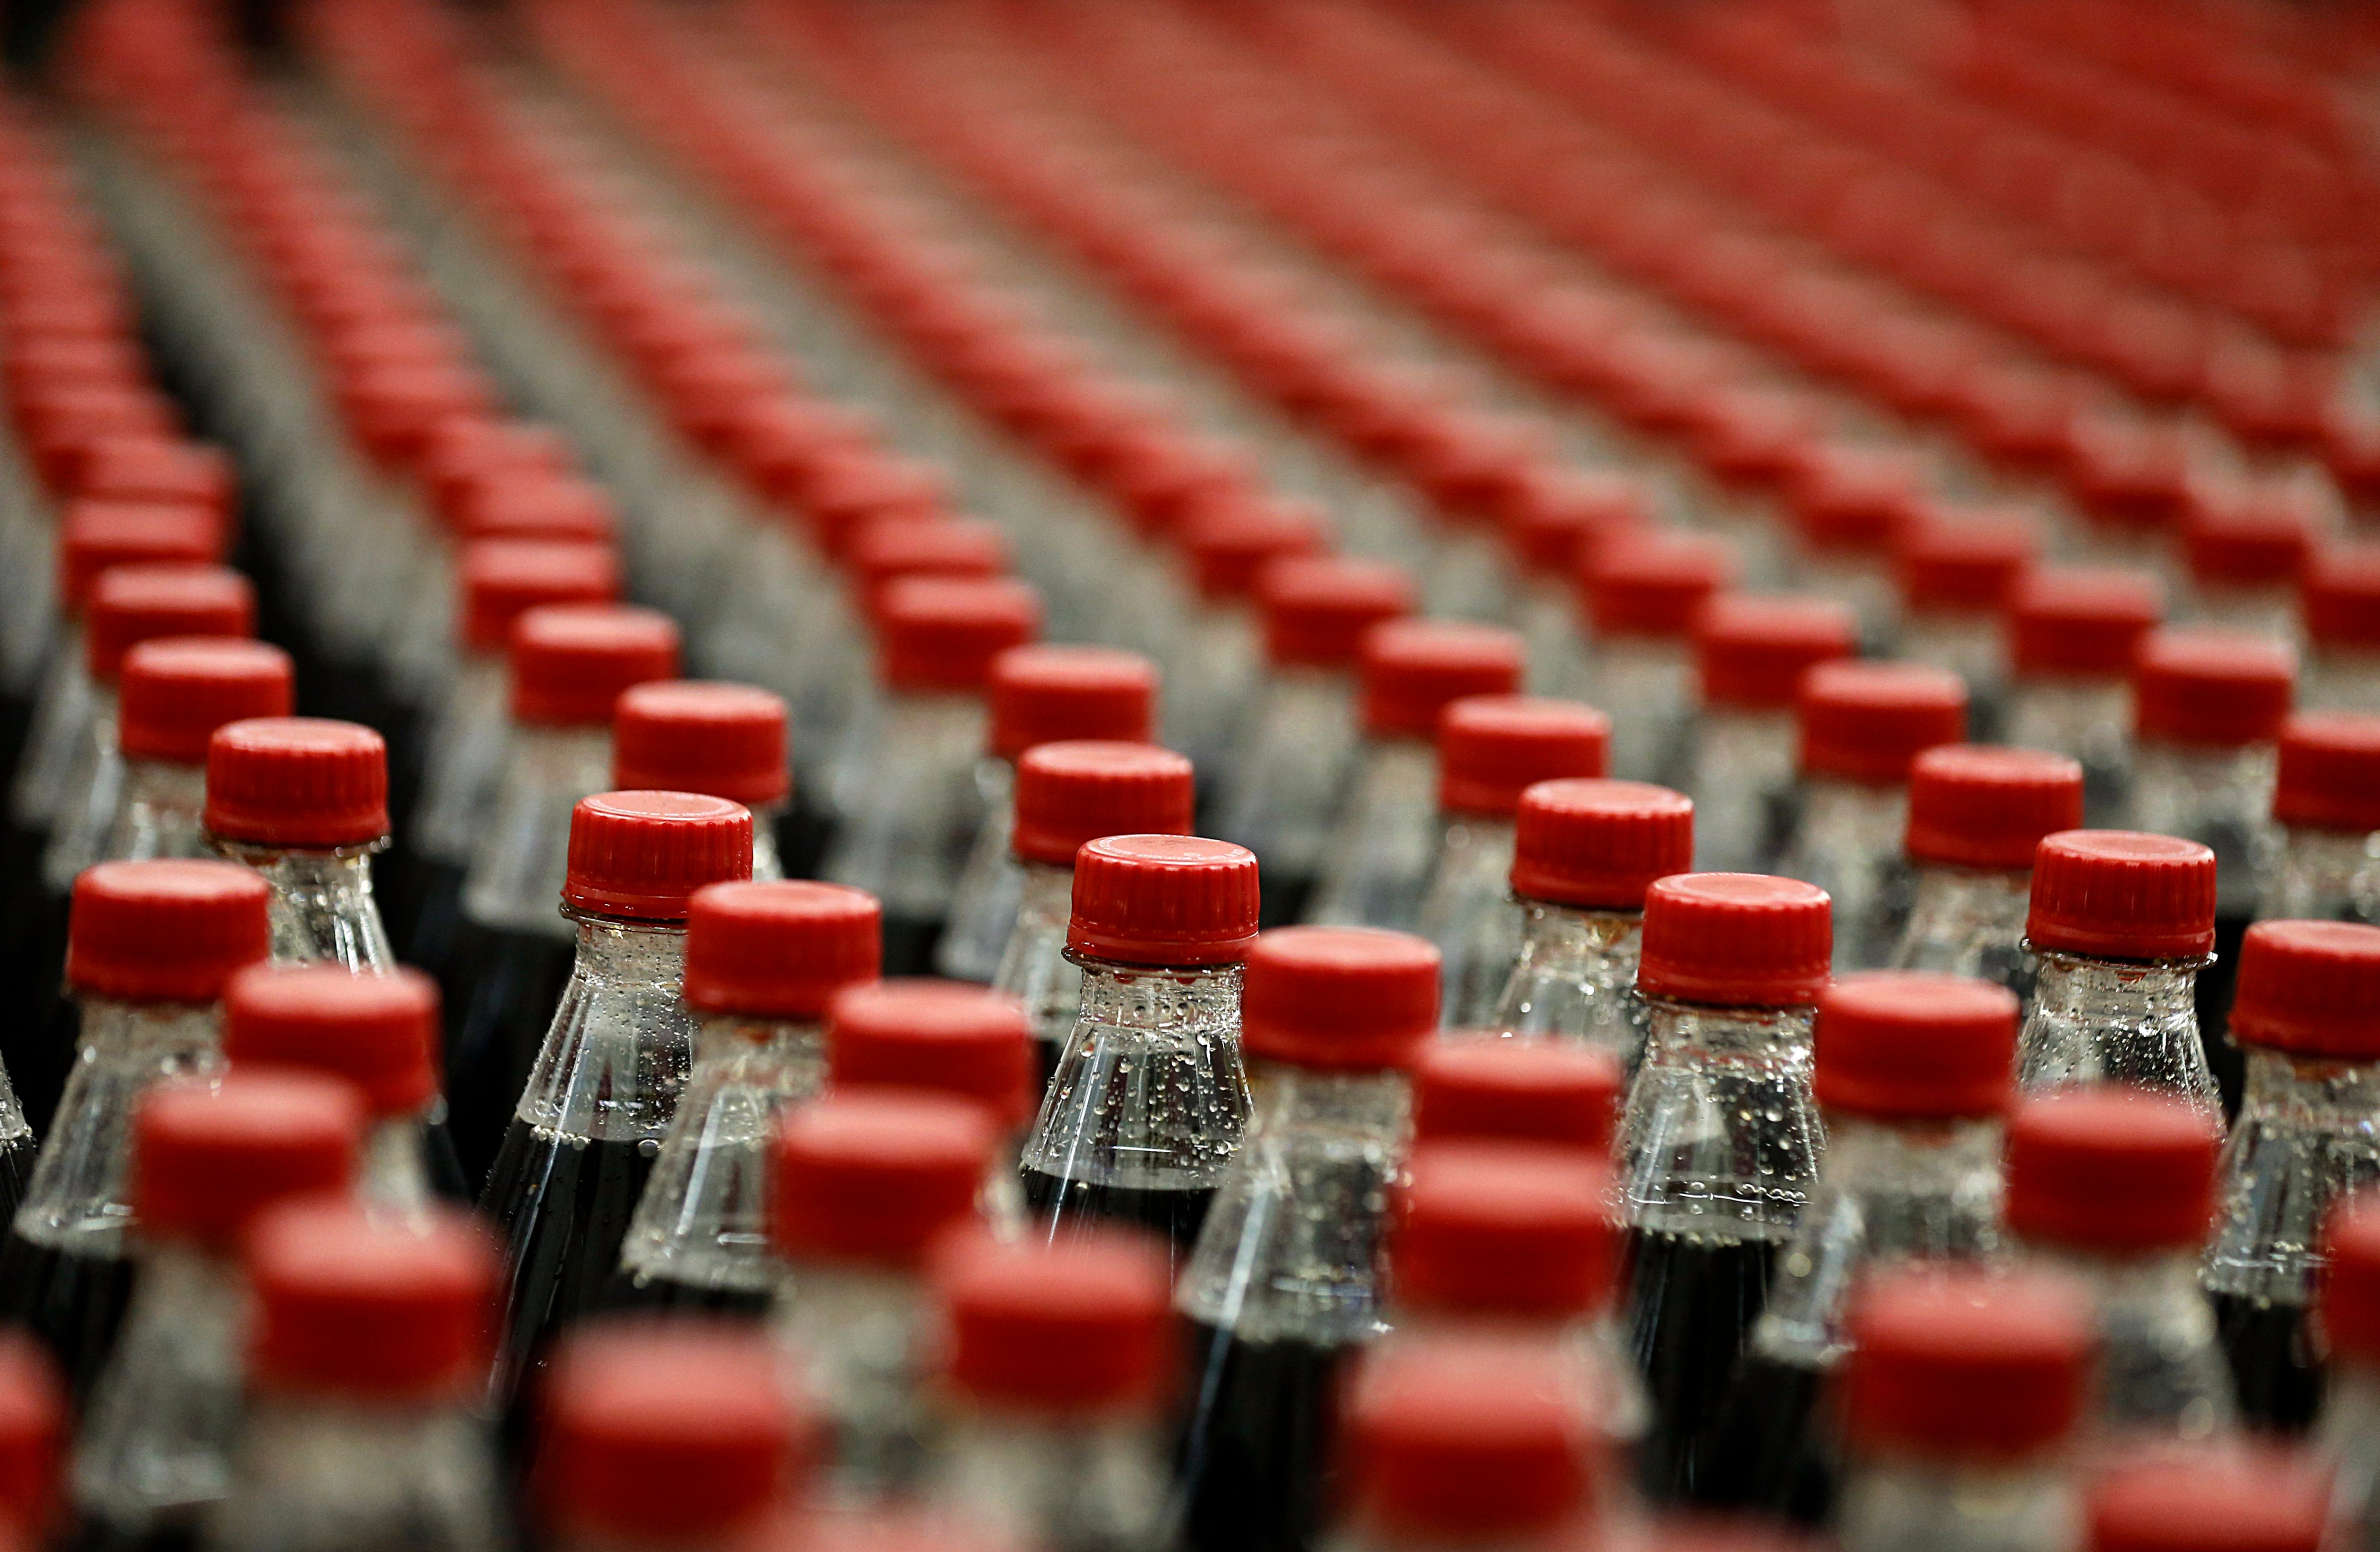 Bottles of Dr. Pepper in a production line at the Swire Coca-Cola bottling plant in West Valley City, Utah (George Frey—Bloomberg/Getty Images)